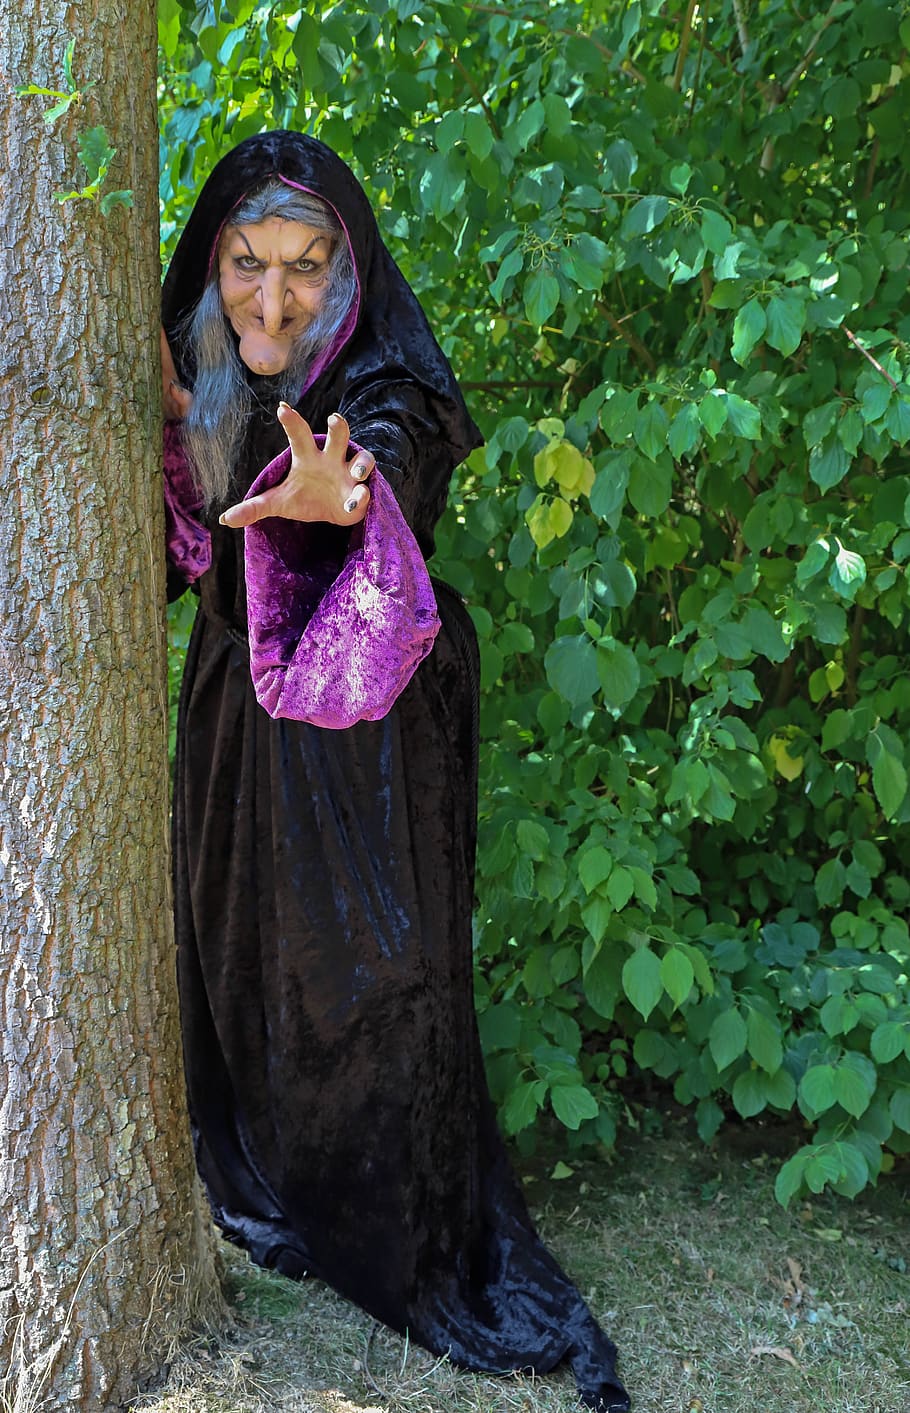 witch, fairy tale, costume, fantasy, role-play, plant, real people, one person, tree, women